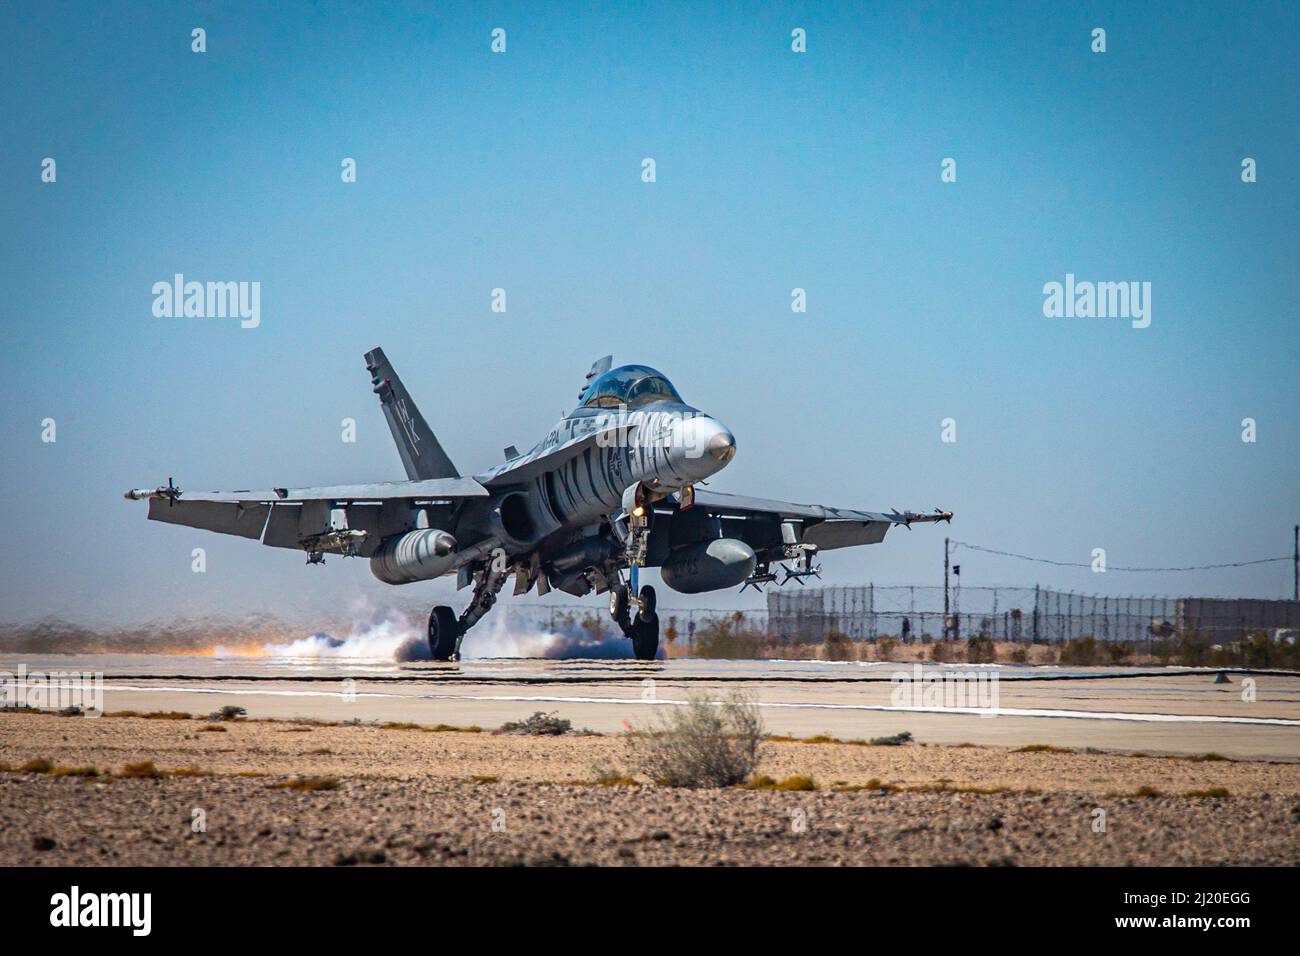 A U.S. Marine Corps F/A-18 Hornet conducts a mock emergency landing, during an emergency arresting exercise during the Weapons and Tactics Instructor (WTI) course 2-22, at Marine Corps Air Station Yuma, Arizona, March 24, 2022. WTI is a seven-week training event hosted by MAWTS-1, providing standardized advanced tactical training and certification of unit instructor qualifications to support Marine aviation training and readiness, and assists in developing and employing aviation weapons and tactics. (U.S. Marine Corps photo by Lance Cpl. Symira Bostic) Stock Photo